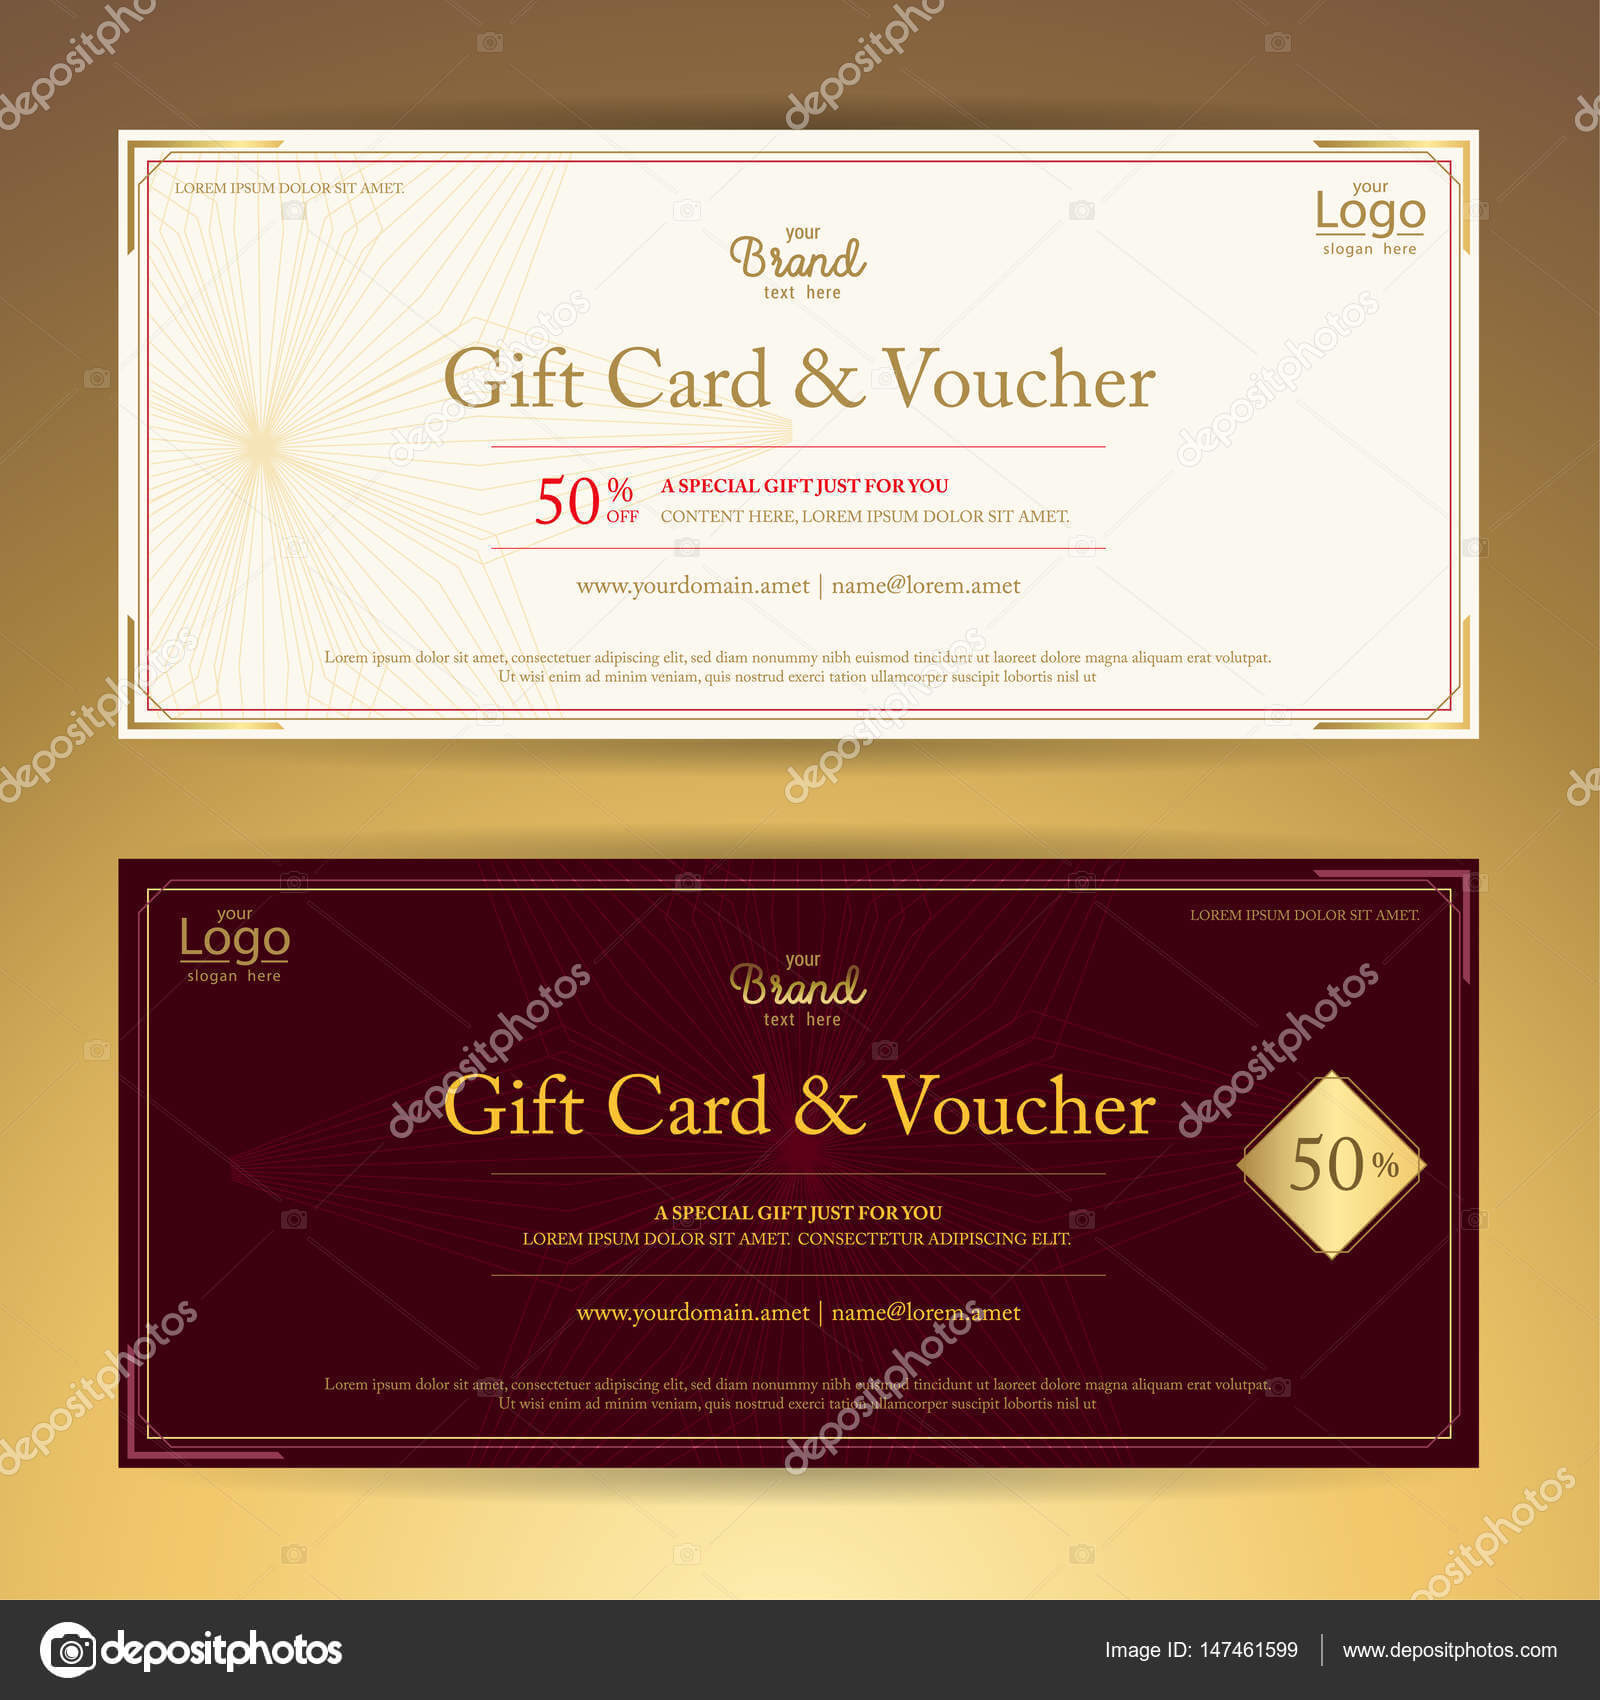 Elegant Gift Voucher Or Gift Card Or Coupon Template For With Elegant Gift Certificate Template